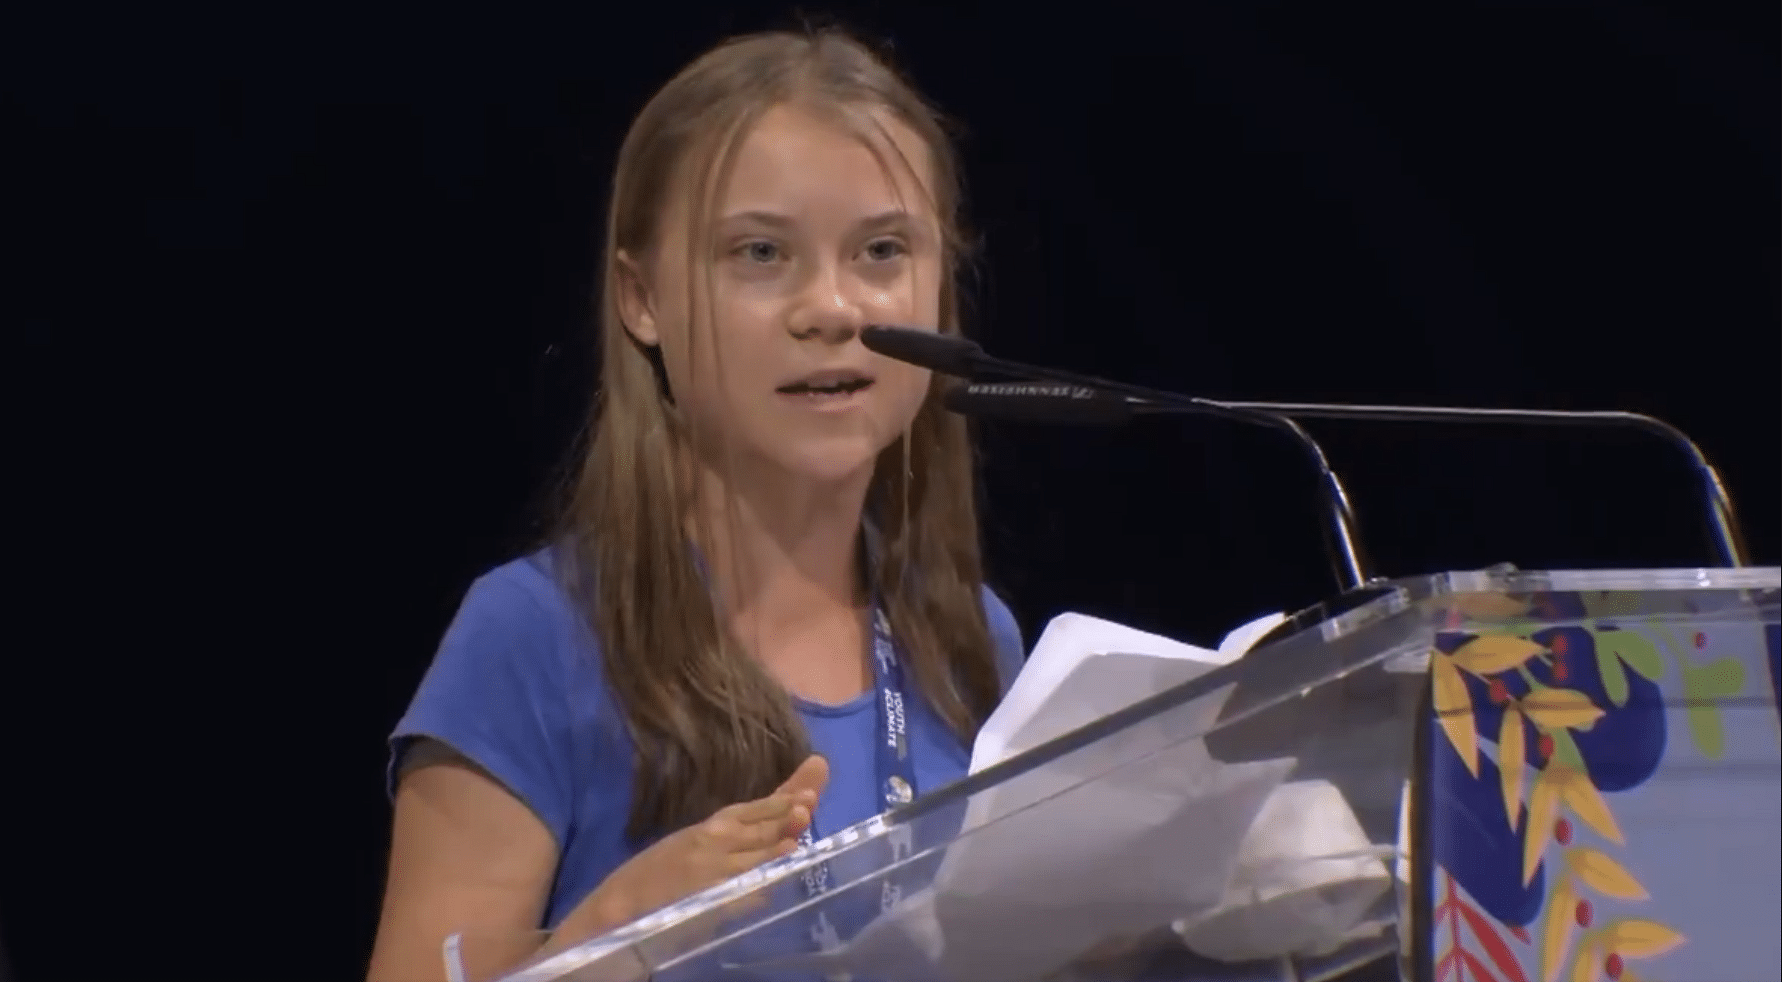 <div class="paragraphs"><p>Greta Thunberg was addressing hundreds of young activists from about 190 countries who have assembled in Italy's Milan this week for Youth4Climate summit.</p></div>